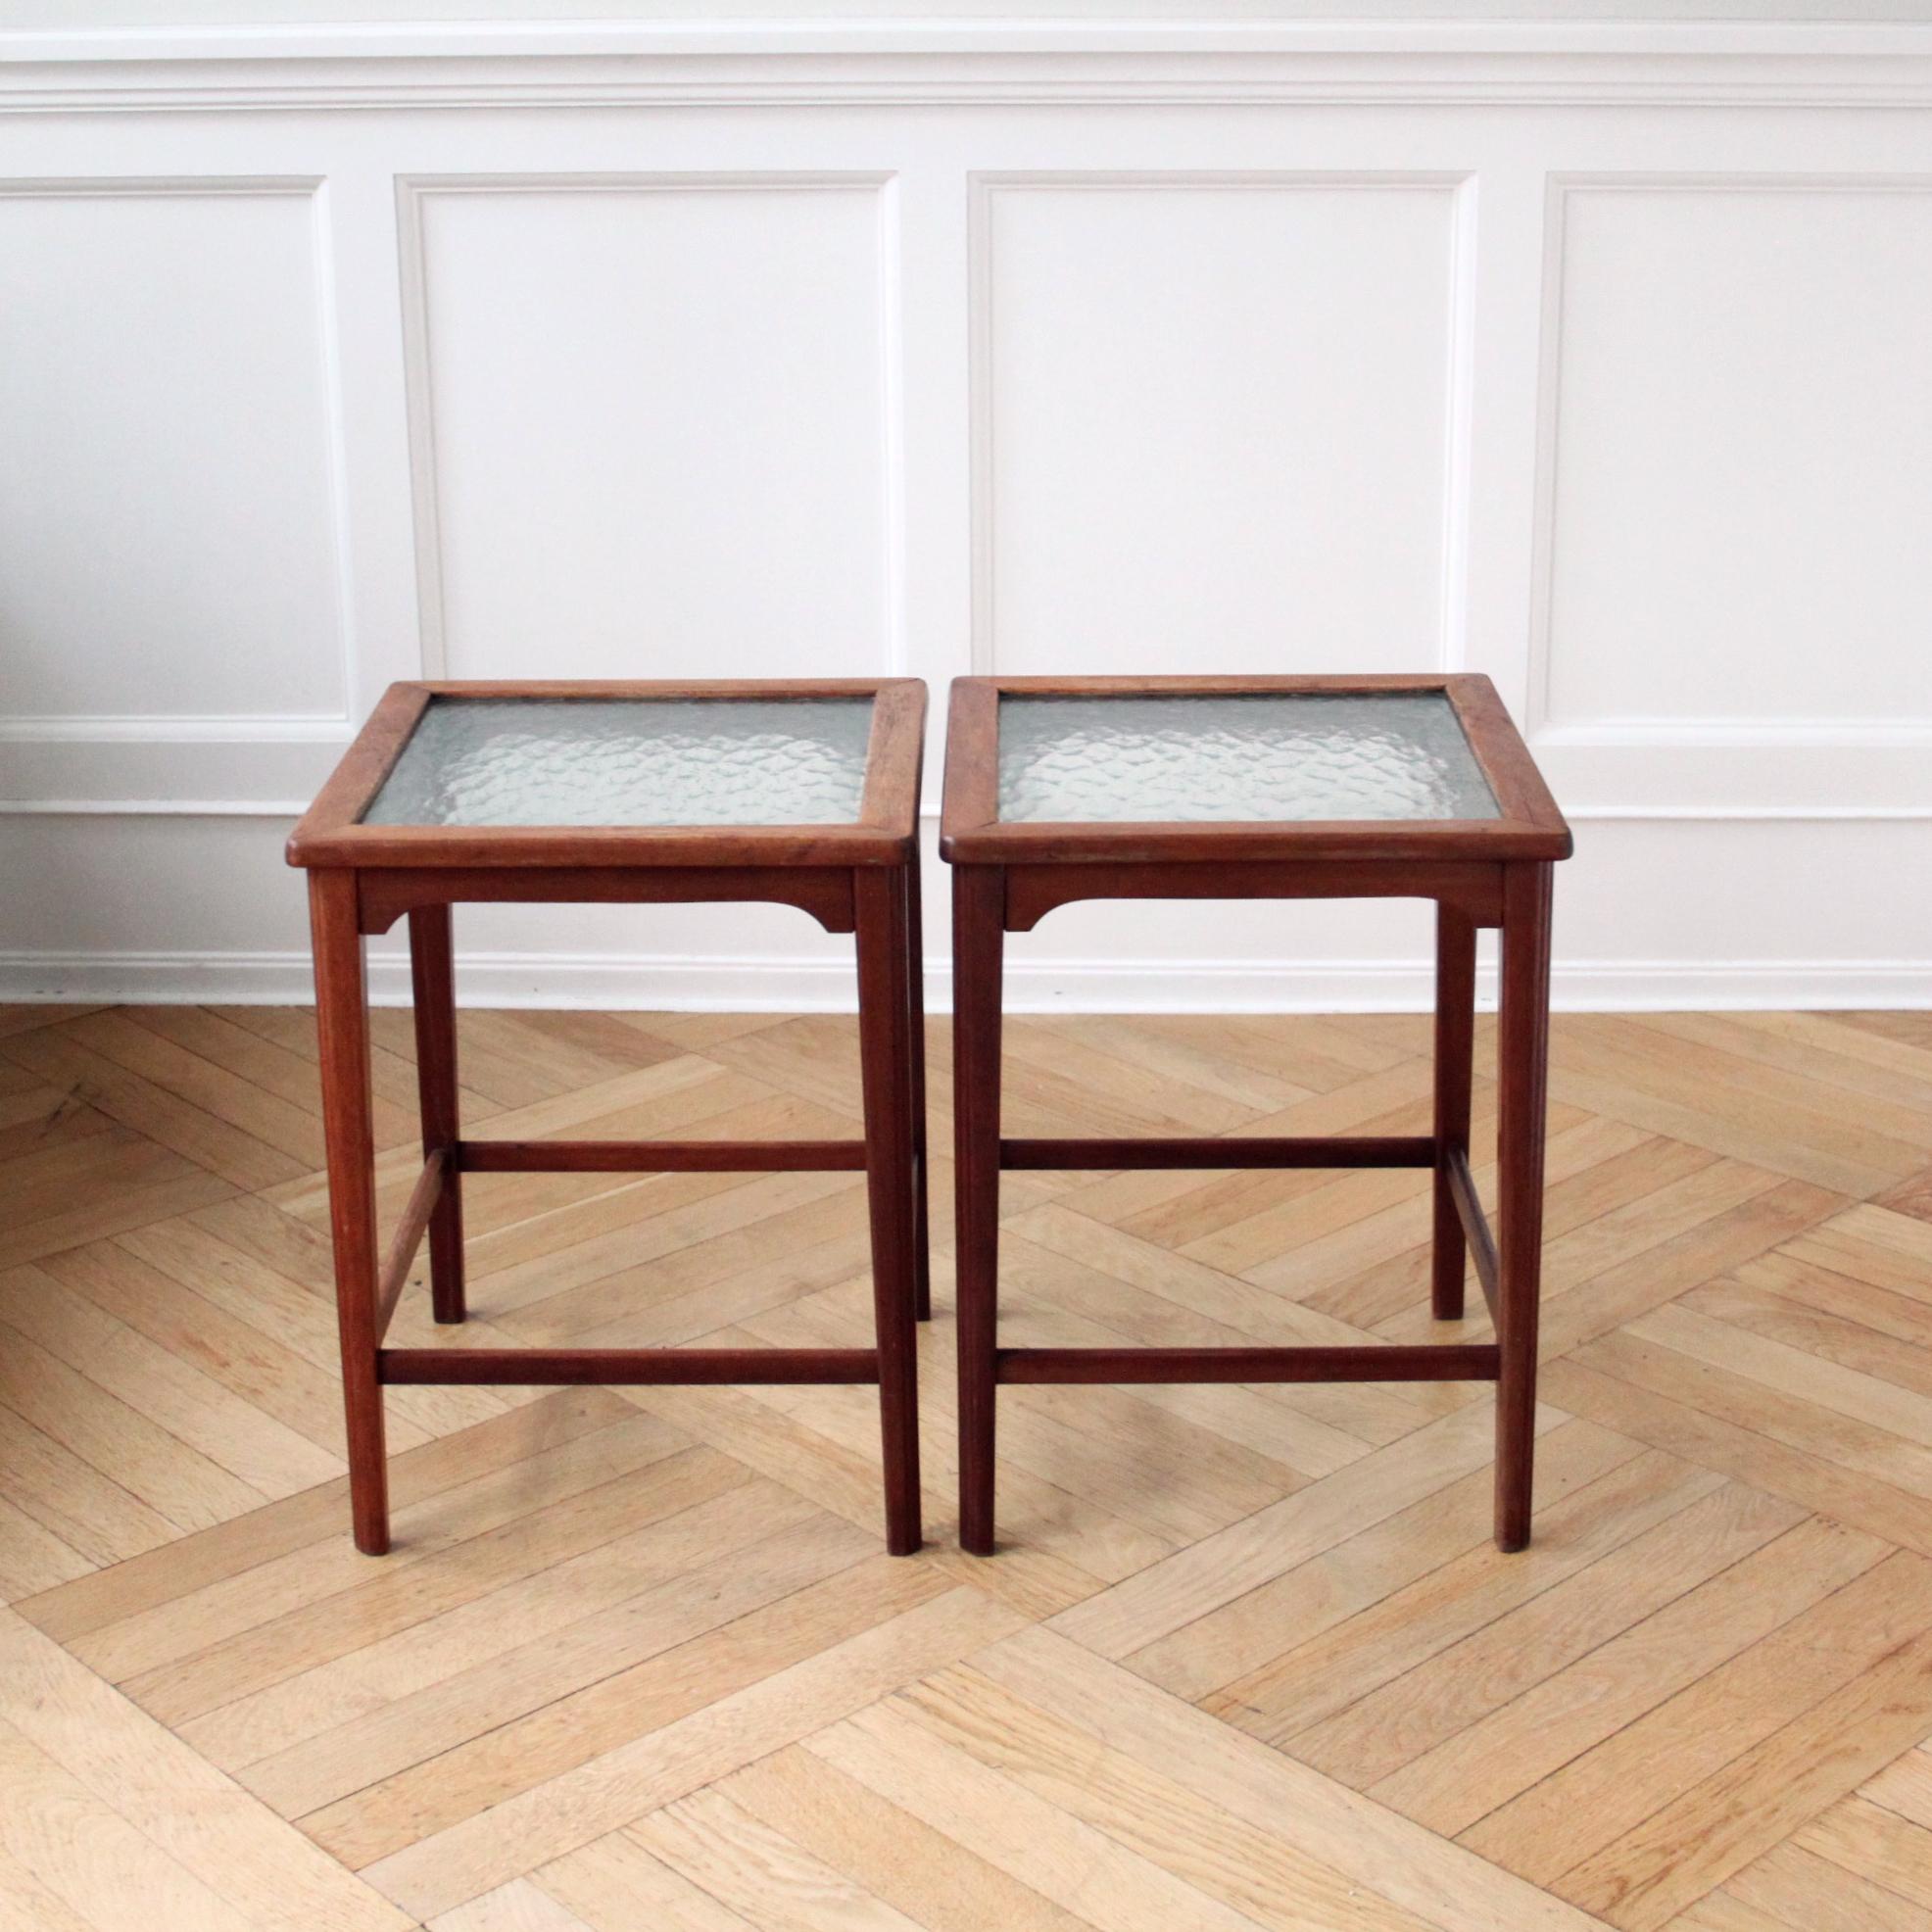 20th Century Pair of Scandinavian Modern Side Tables, Mahogany and Decorative Glass, 1940s  For Sale